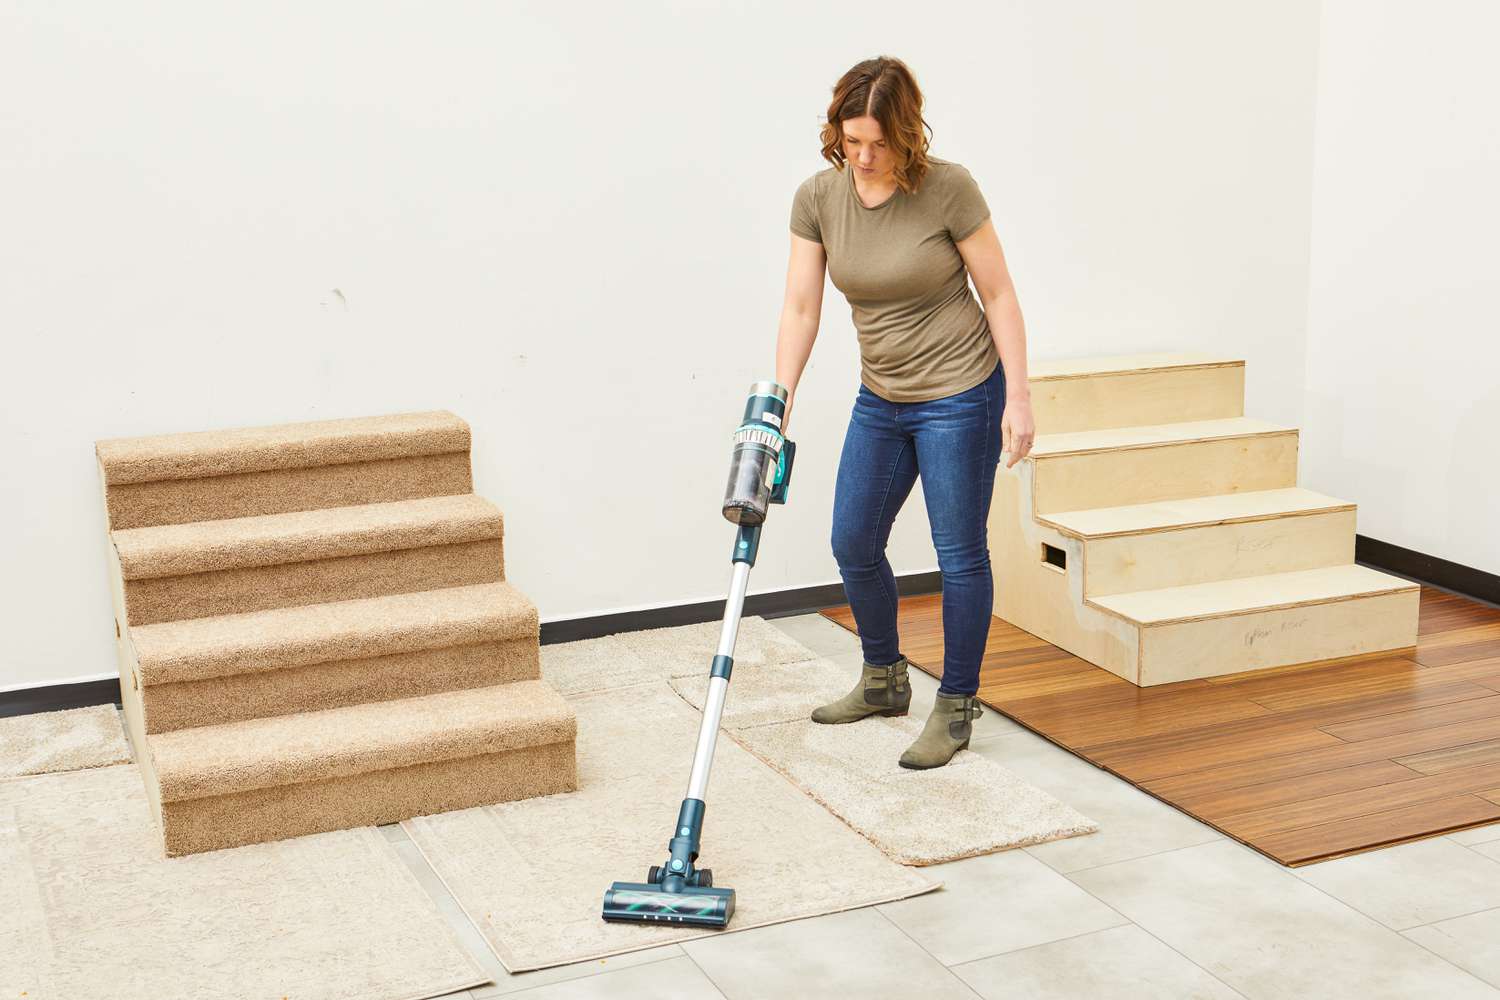 A person uses the Belife V12 Cordless Vacuum Cleaner to clean a rug.